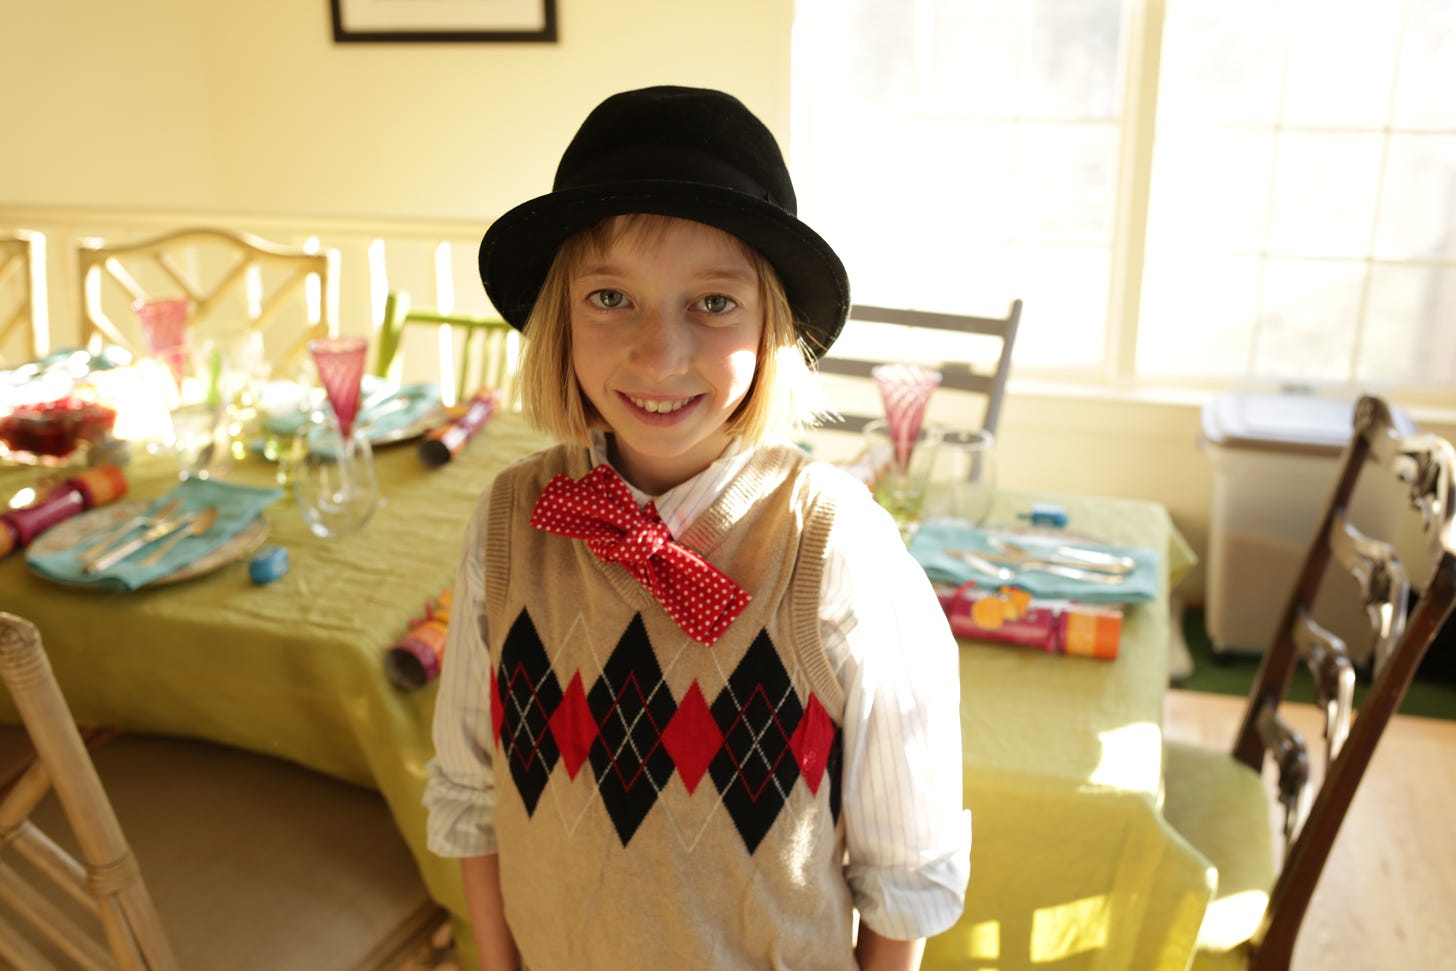 Bea, a young girl smiling at the camera, wearing a fedora, sweater vest and bow tie. 